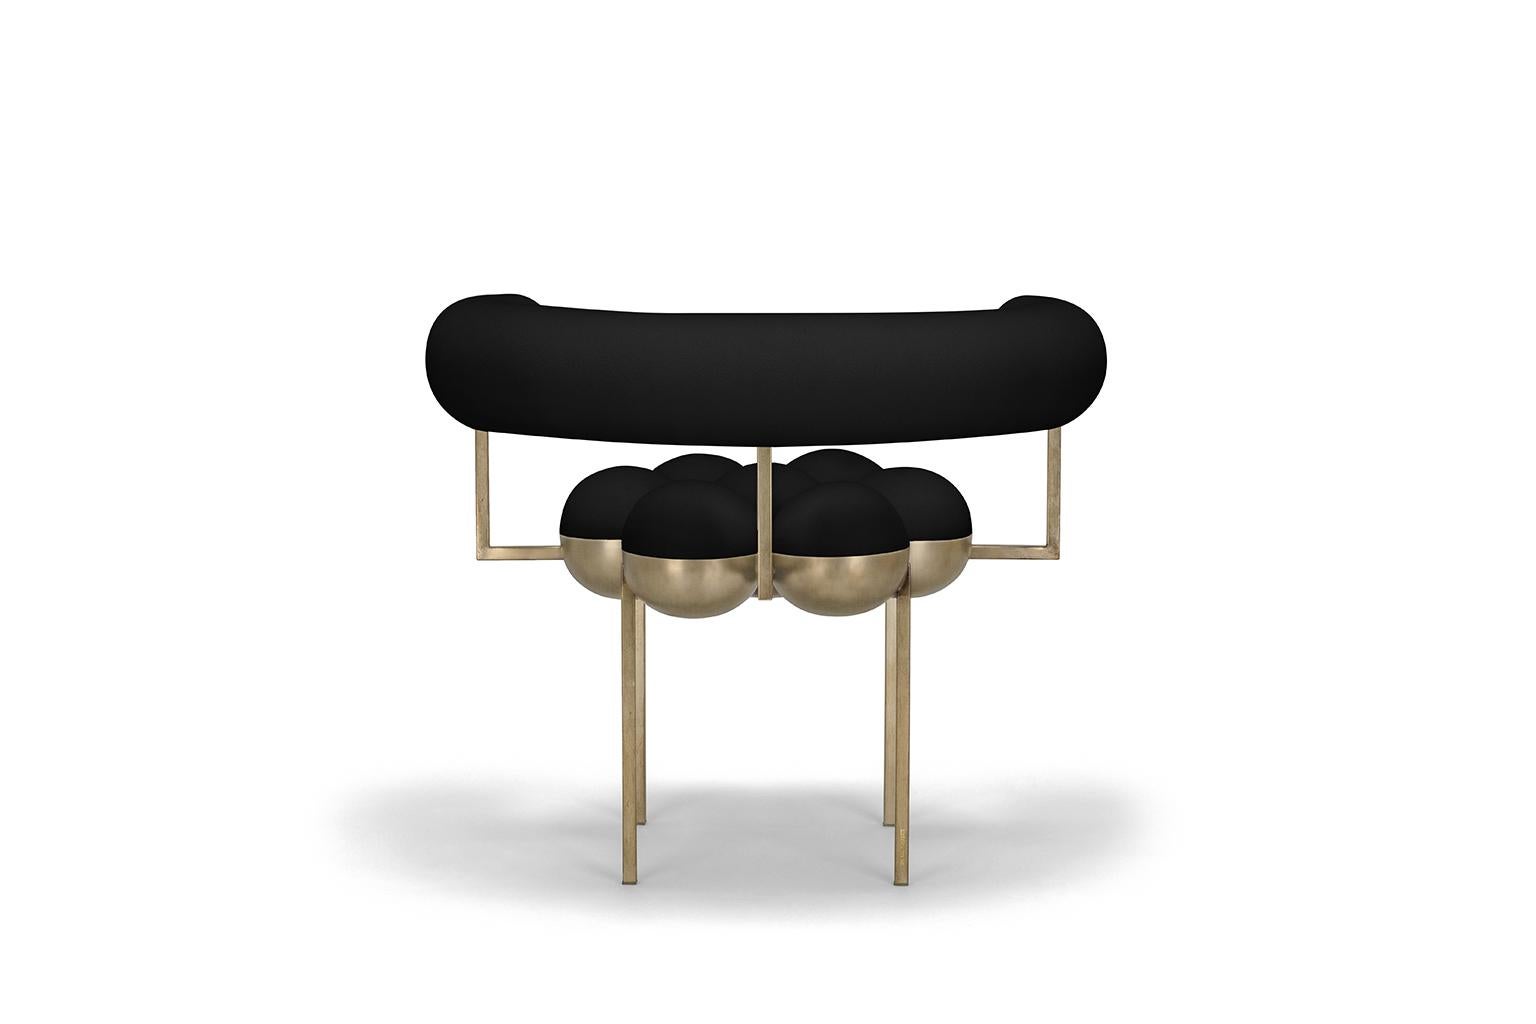 Saturn chair, black and bronze by Bohinc Studio. The distinctive Saturn chair is a return to the split sphere concepts Bohinc originally created for her jewelry collections such as sun and moon and solaris. This form has now evolved to create